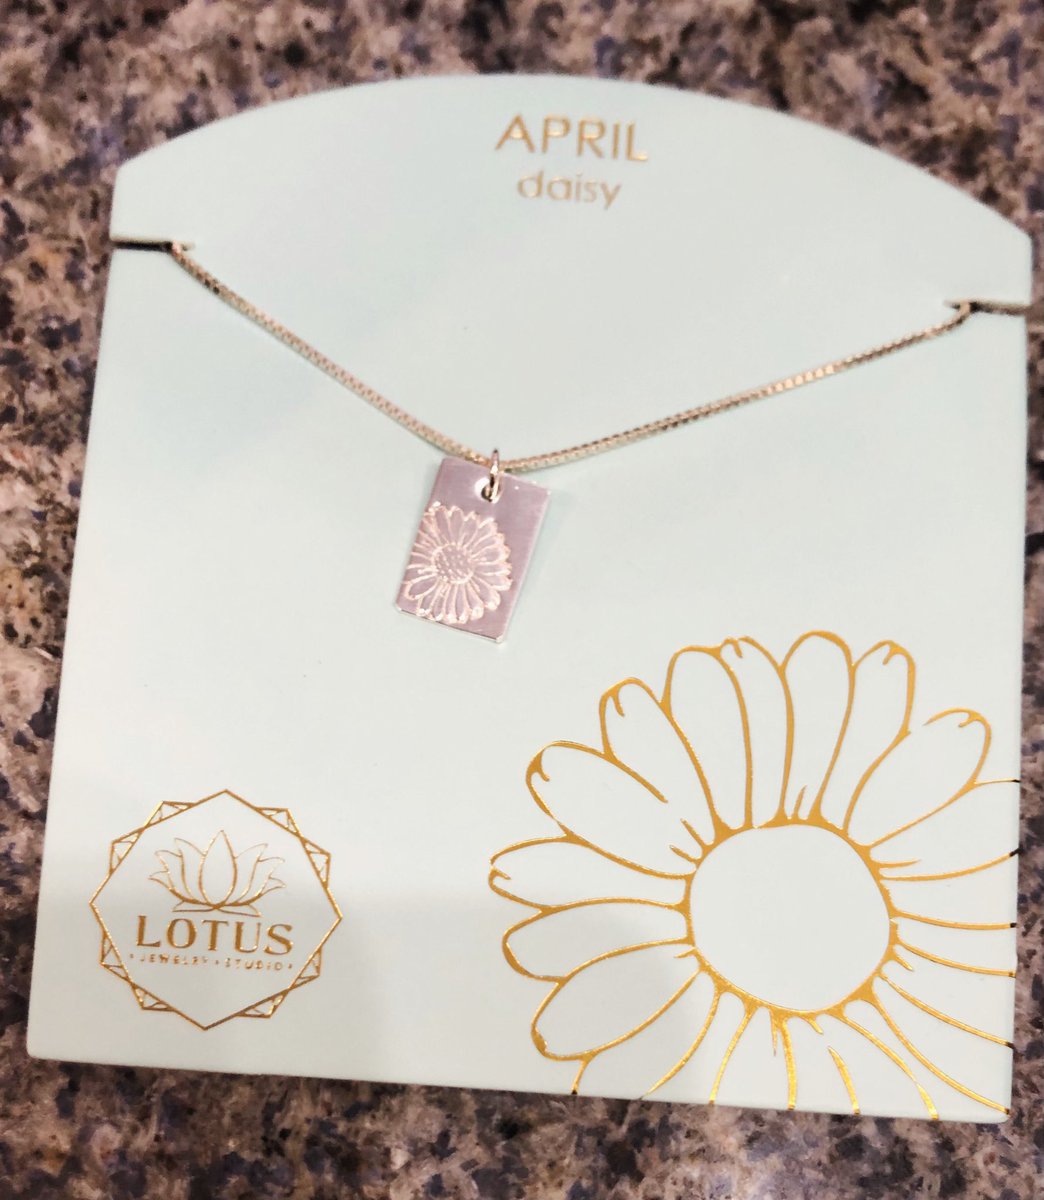 Happy Birthday April Babes 🥳 Did you know the daisy is your birth month flower?! #GiftGivingSimplified #Gifts #GiftShop #ShopLocal #CaldwellNJ 🇺🇸 #SmithCoGifts 💙